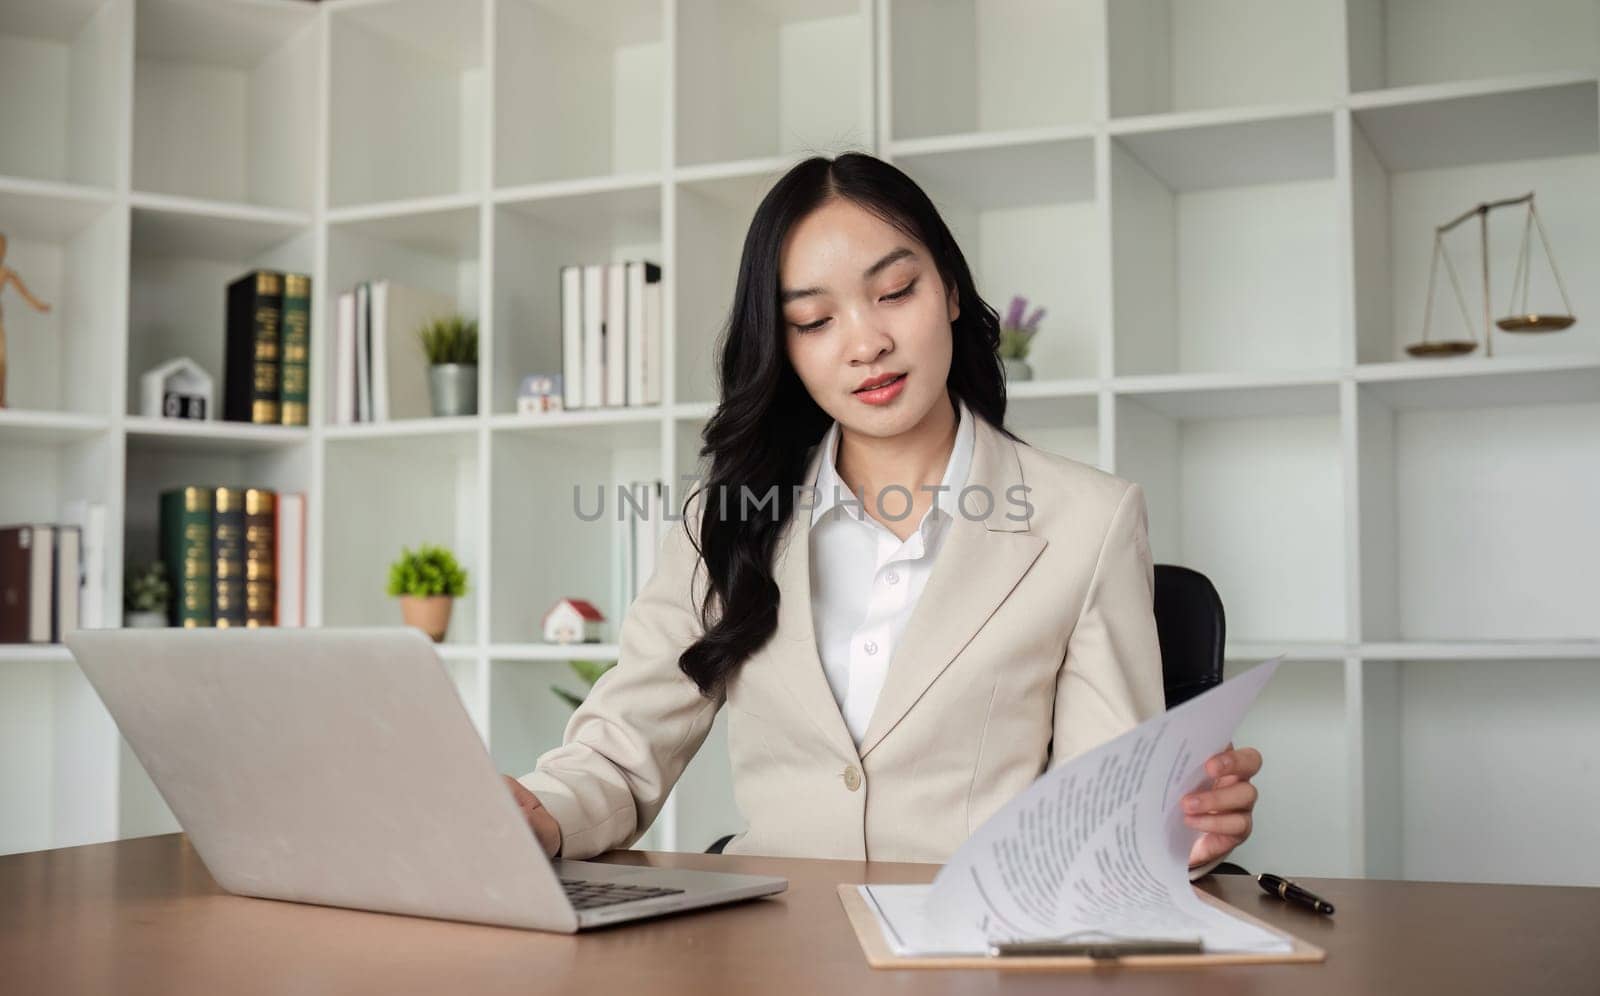 A female Asian lawyer reviews business and real estate laws. Legal consultants provide legal advice and guidance online via laptops in lawyers' offices..